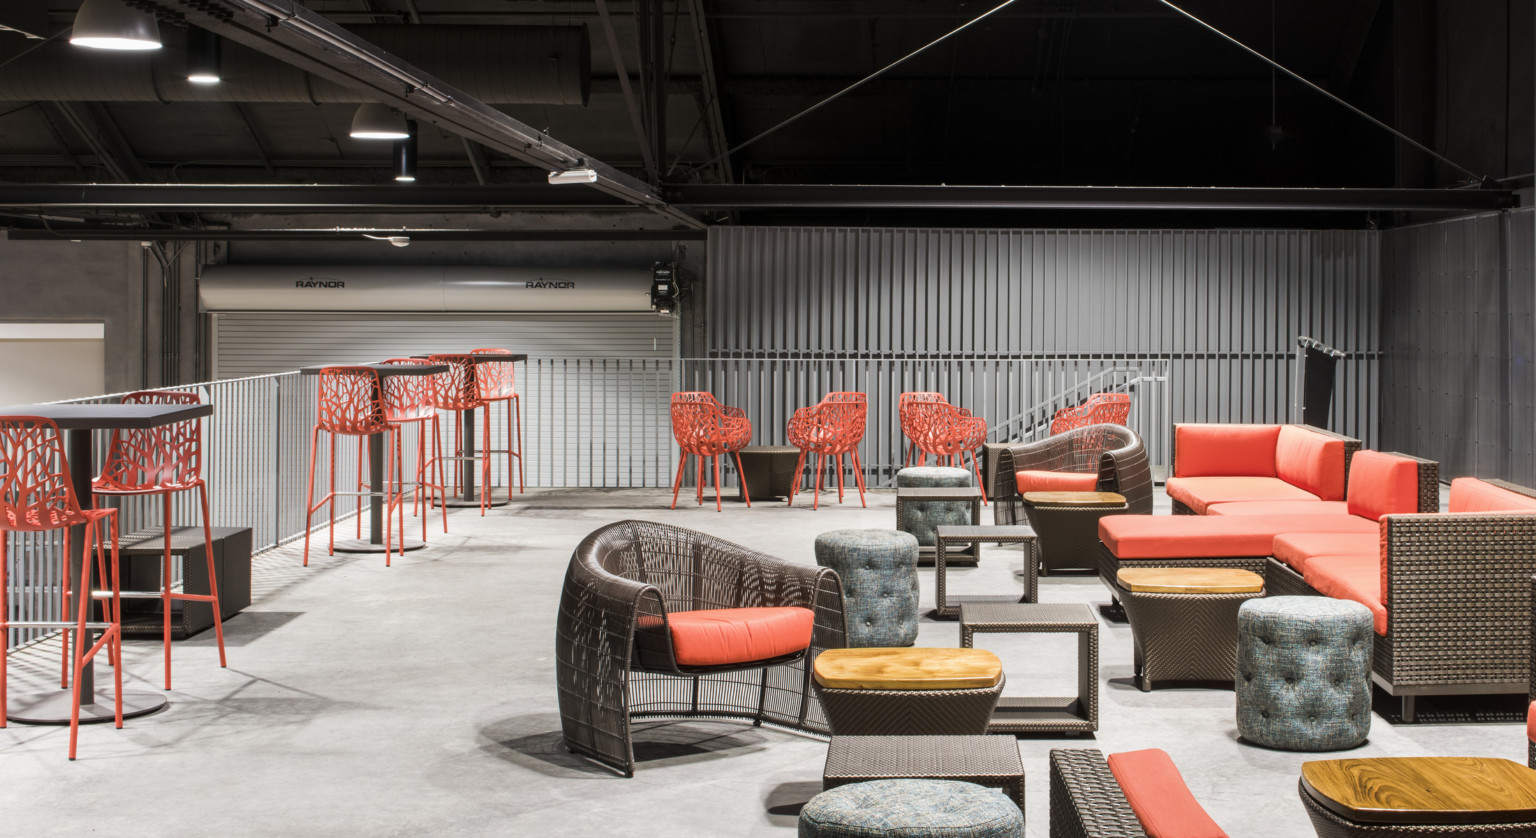 Red lounge seating on mezzanine with couches, chairs, stools, and tables